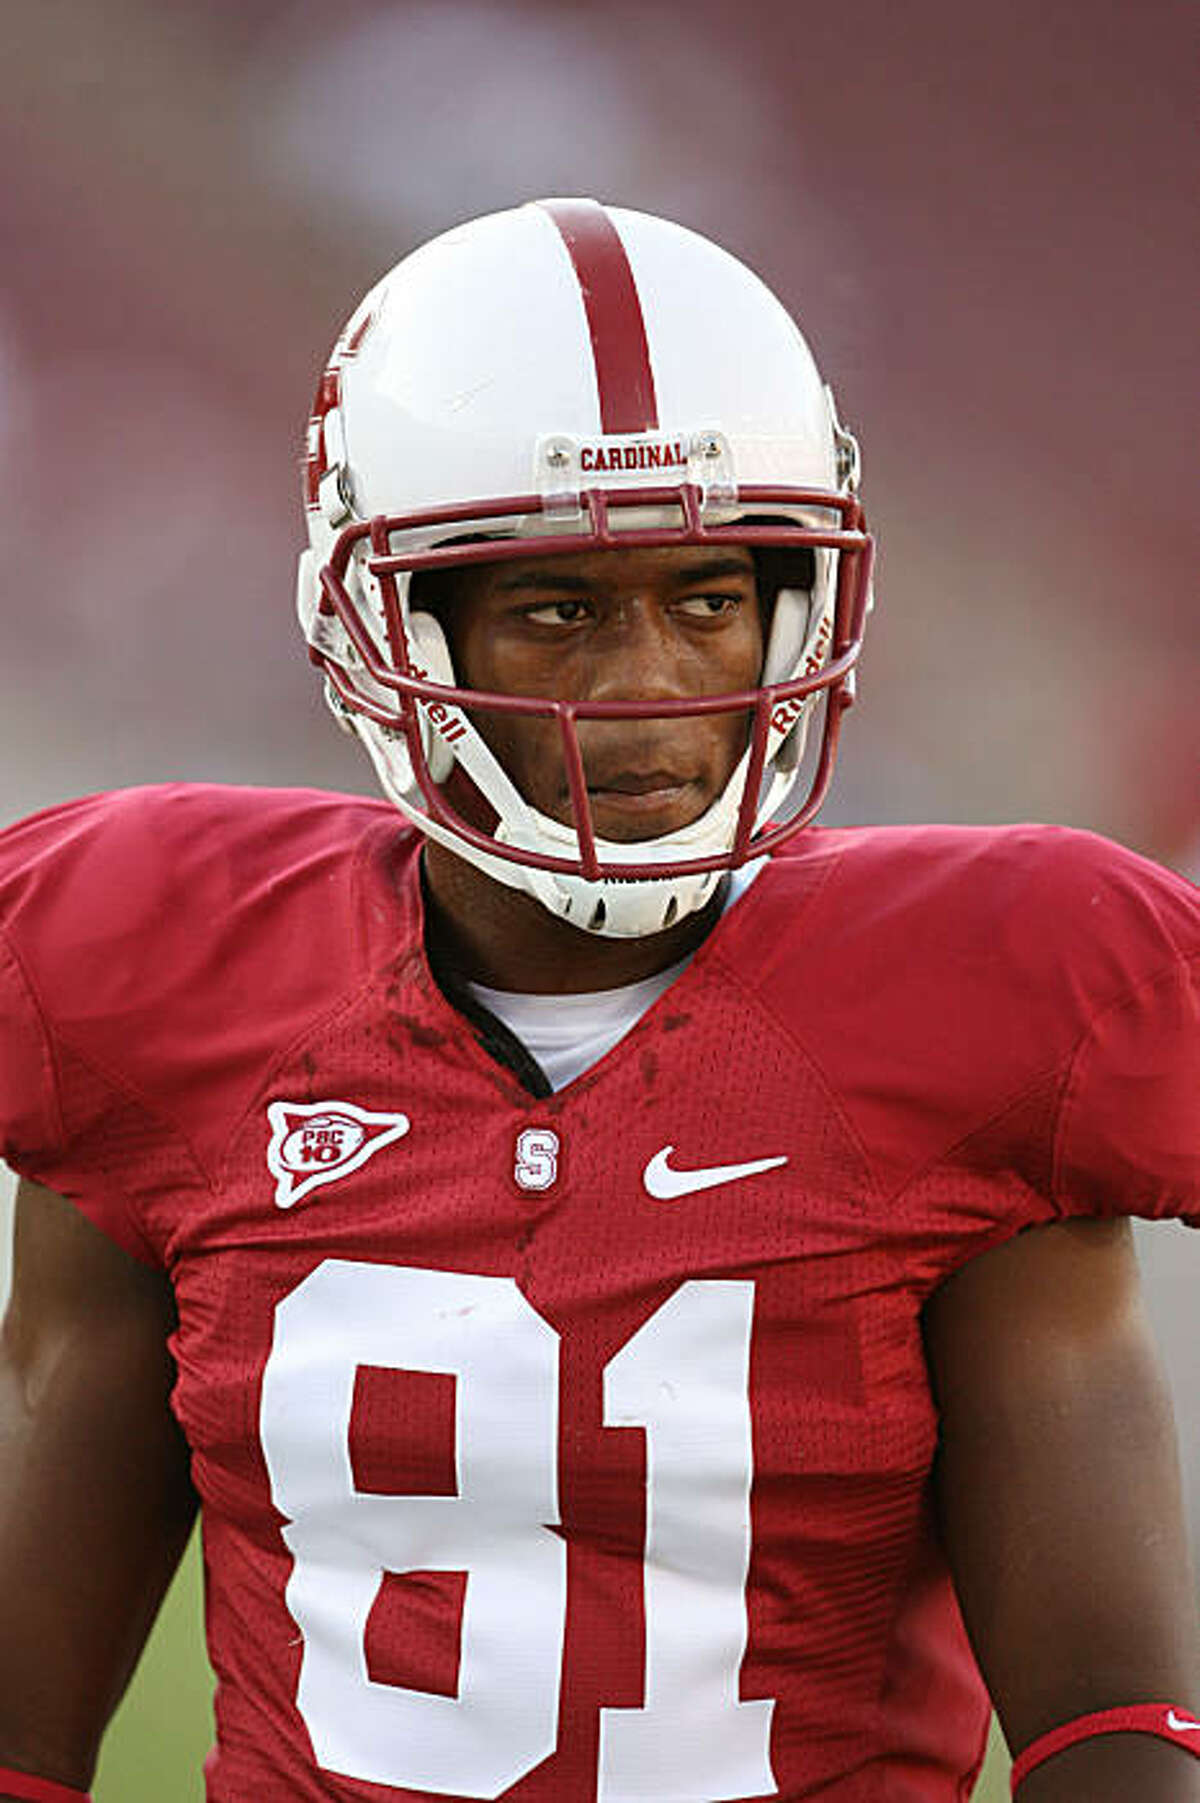 STANFORD, CA - SEPTEMBER 26: Chris Owusu of the Stanford Cardinal during Stanford's 34-14 win over Washington on September 26, 2009 at Stanford Stadium in Stanford, California.